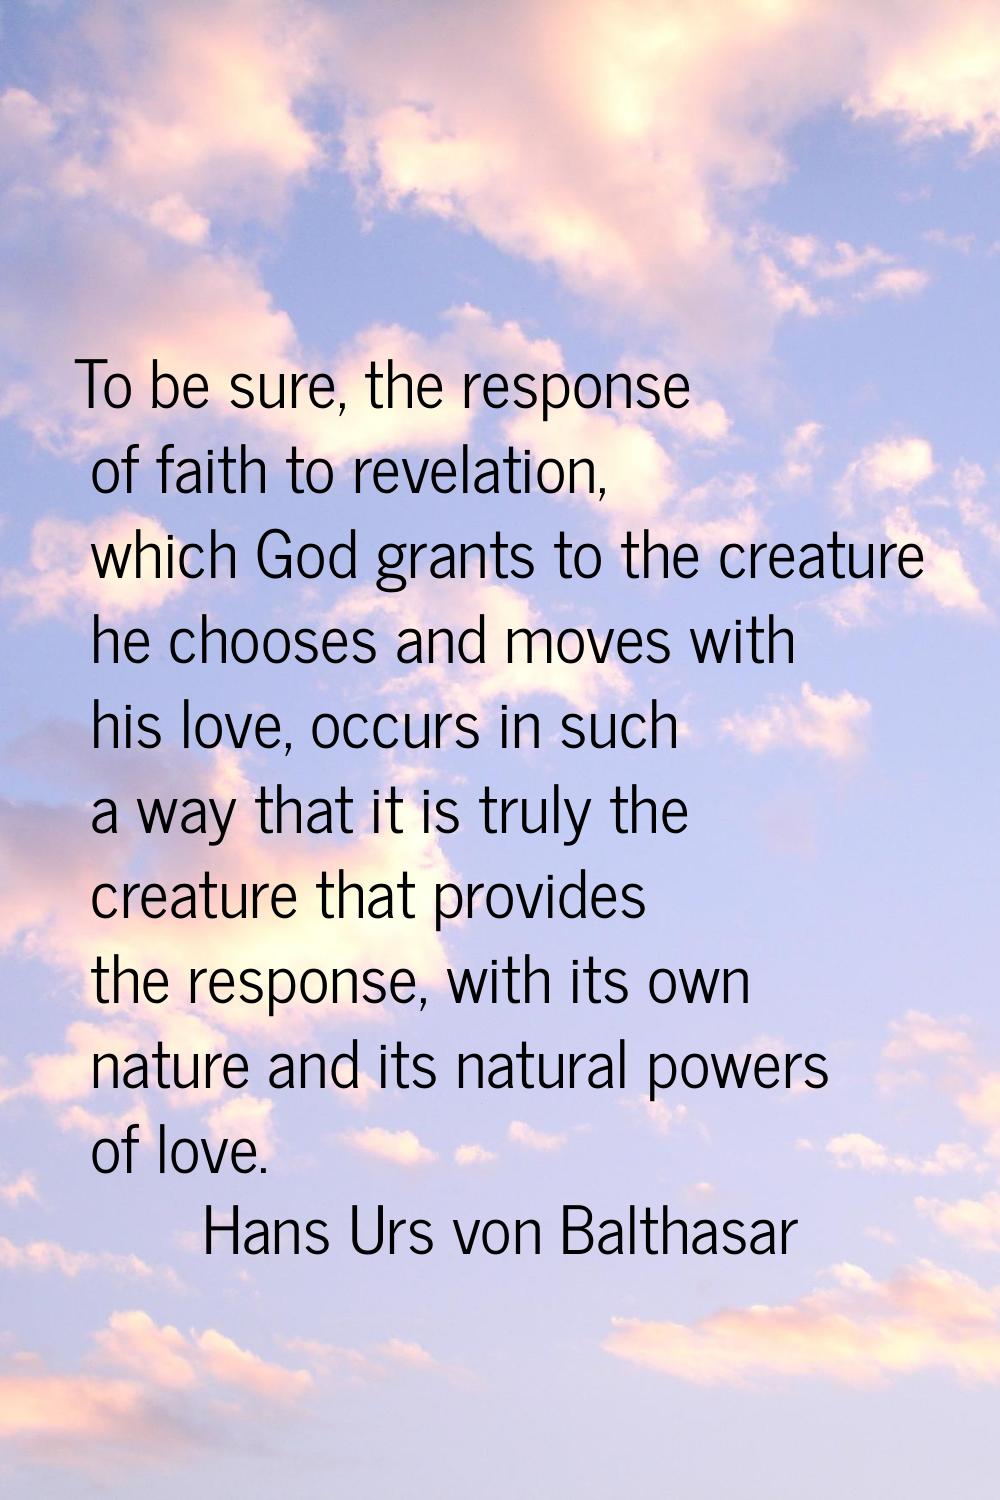 To be sure, the response of faith to revelation, which God grants to the creature he chooses and mo